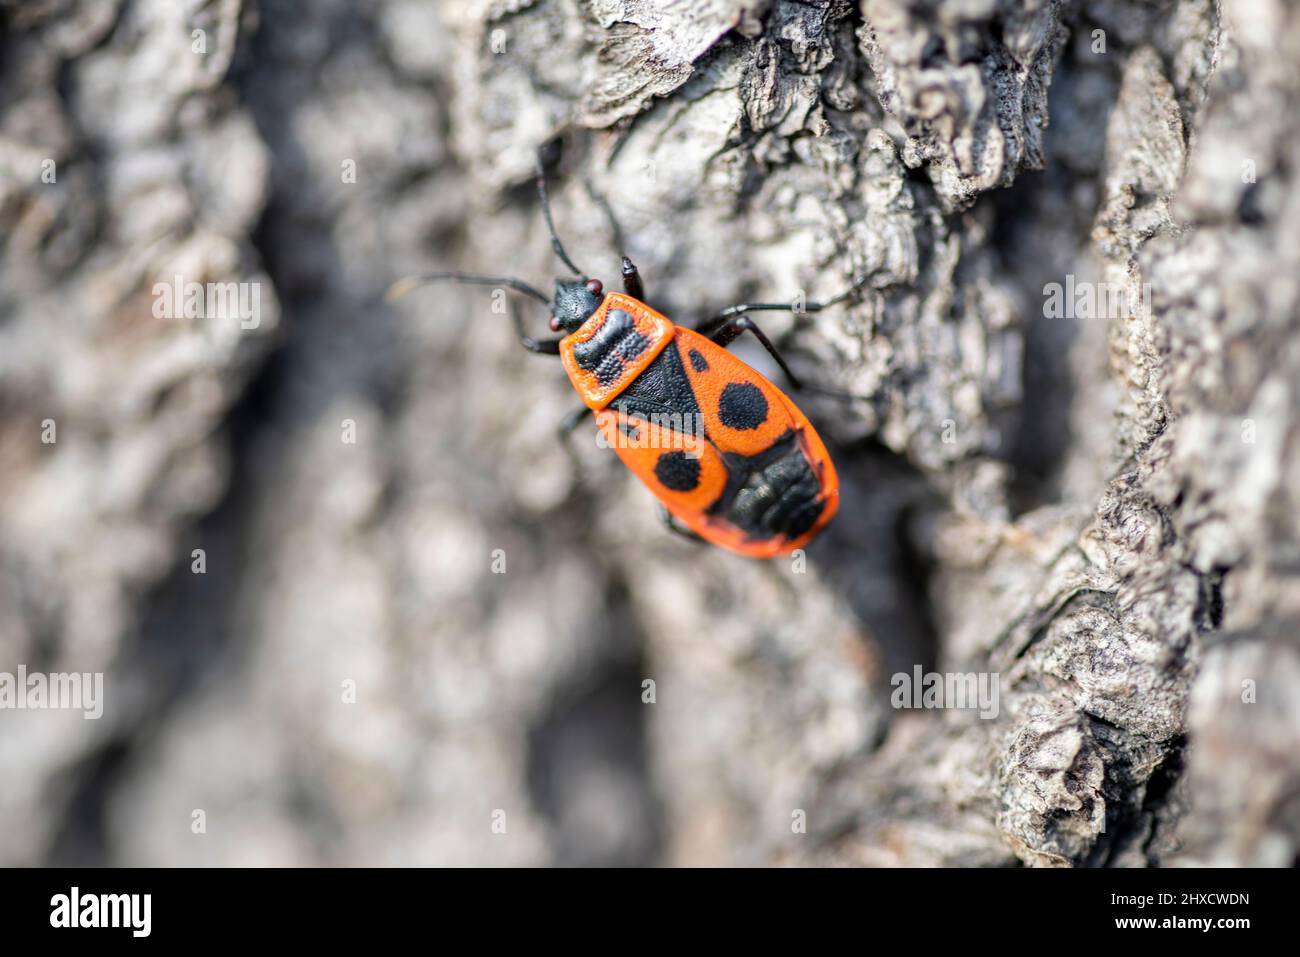 A fire bug (Pyrrhocoris apterus), commonly called a fire beetle, crawls along a tree trunk Stock Photo